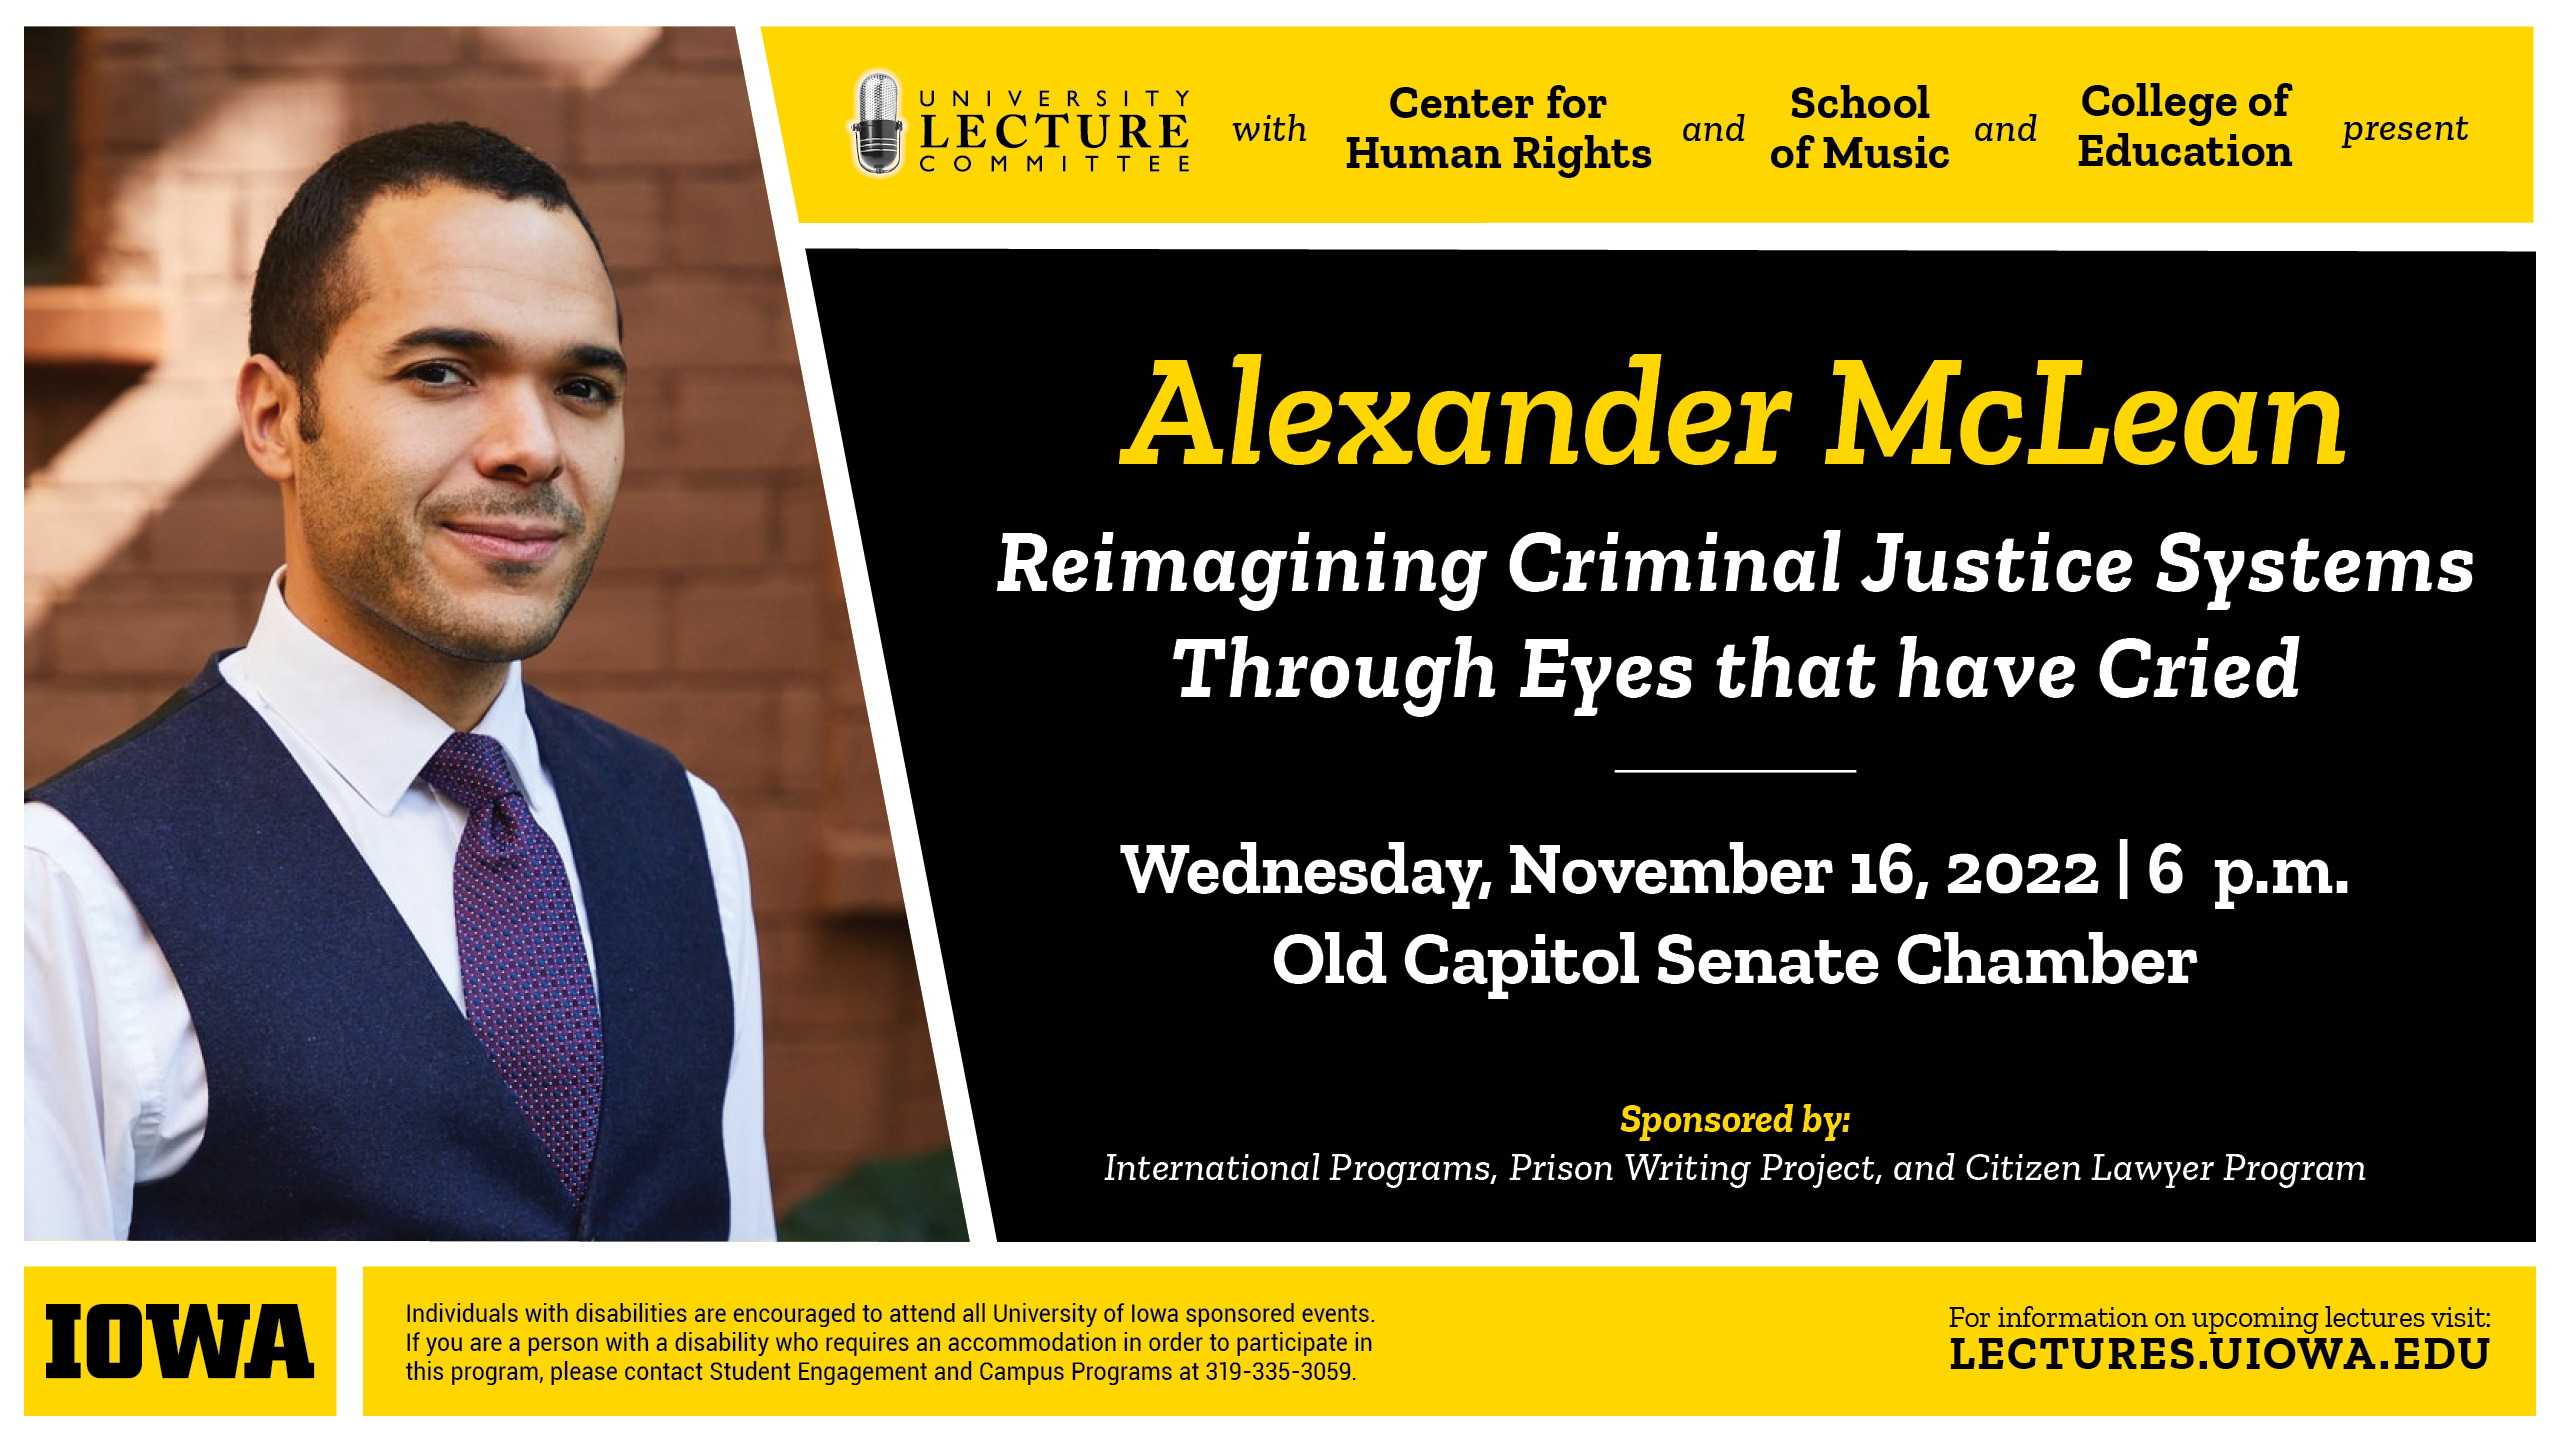 AlexanderMcLean lecture November 16